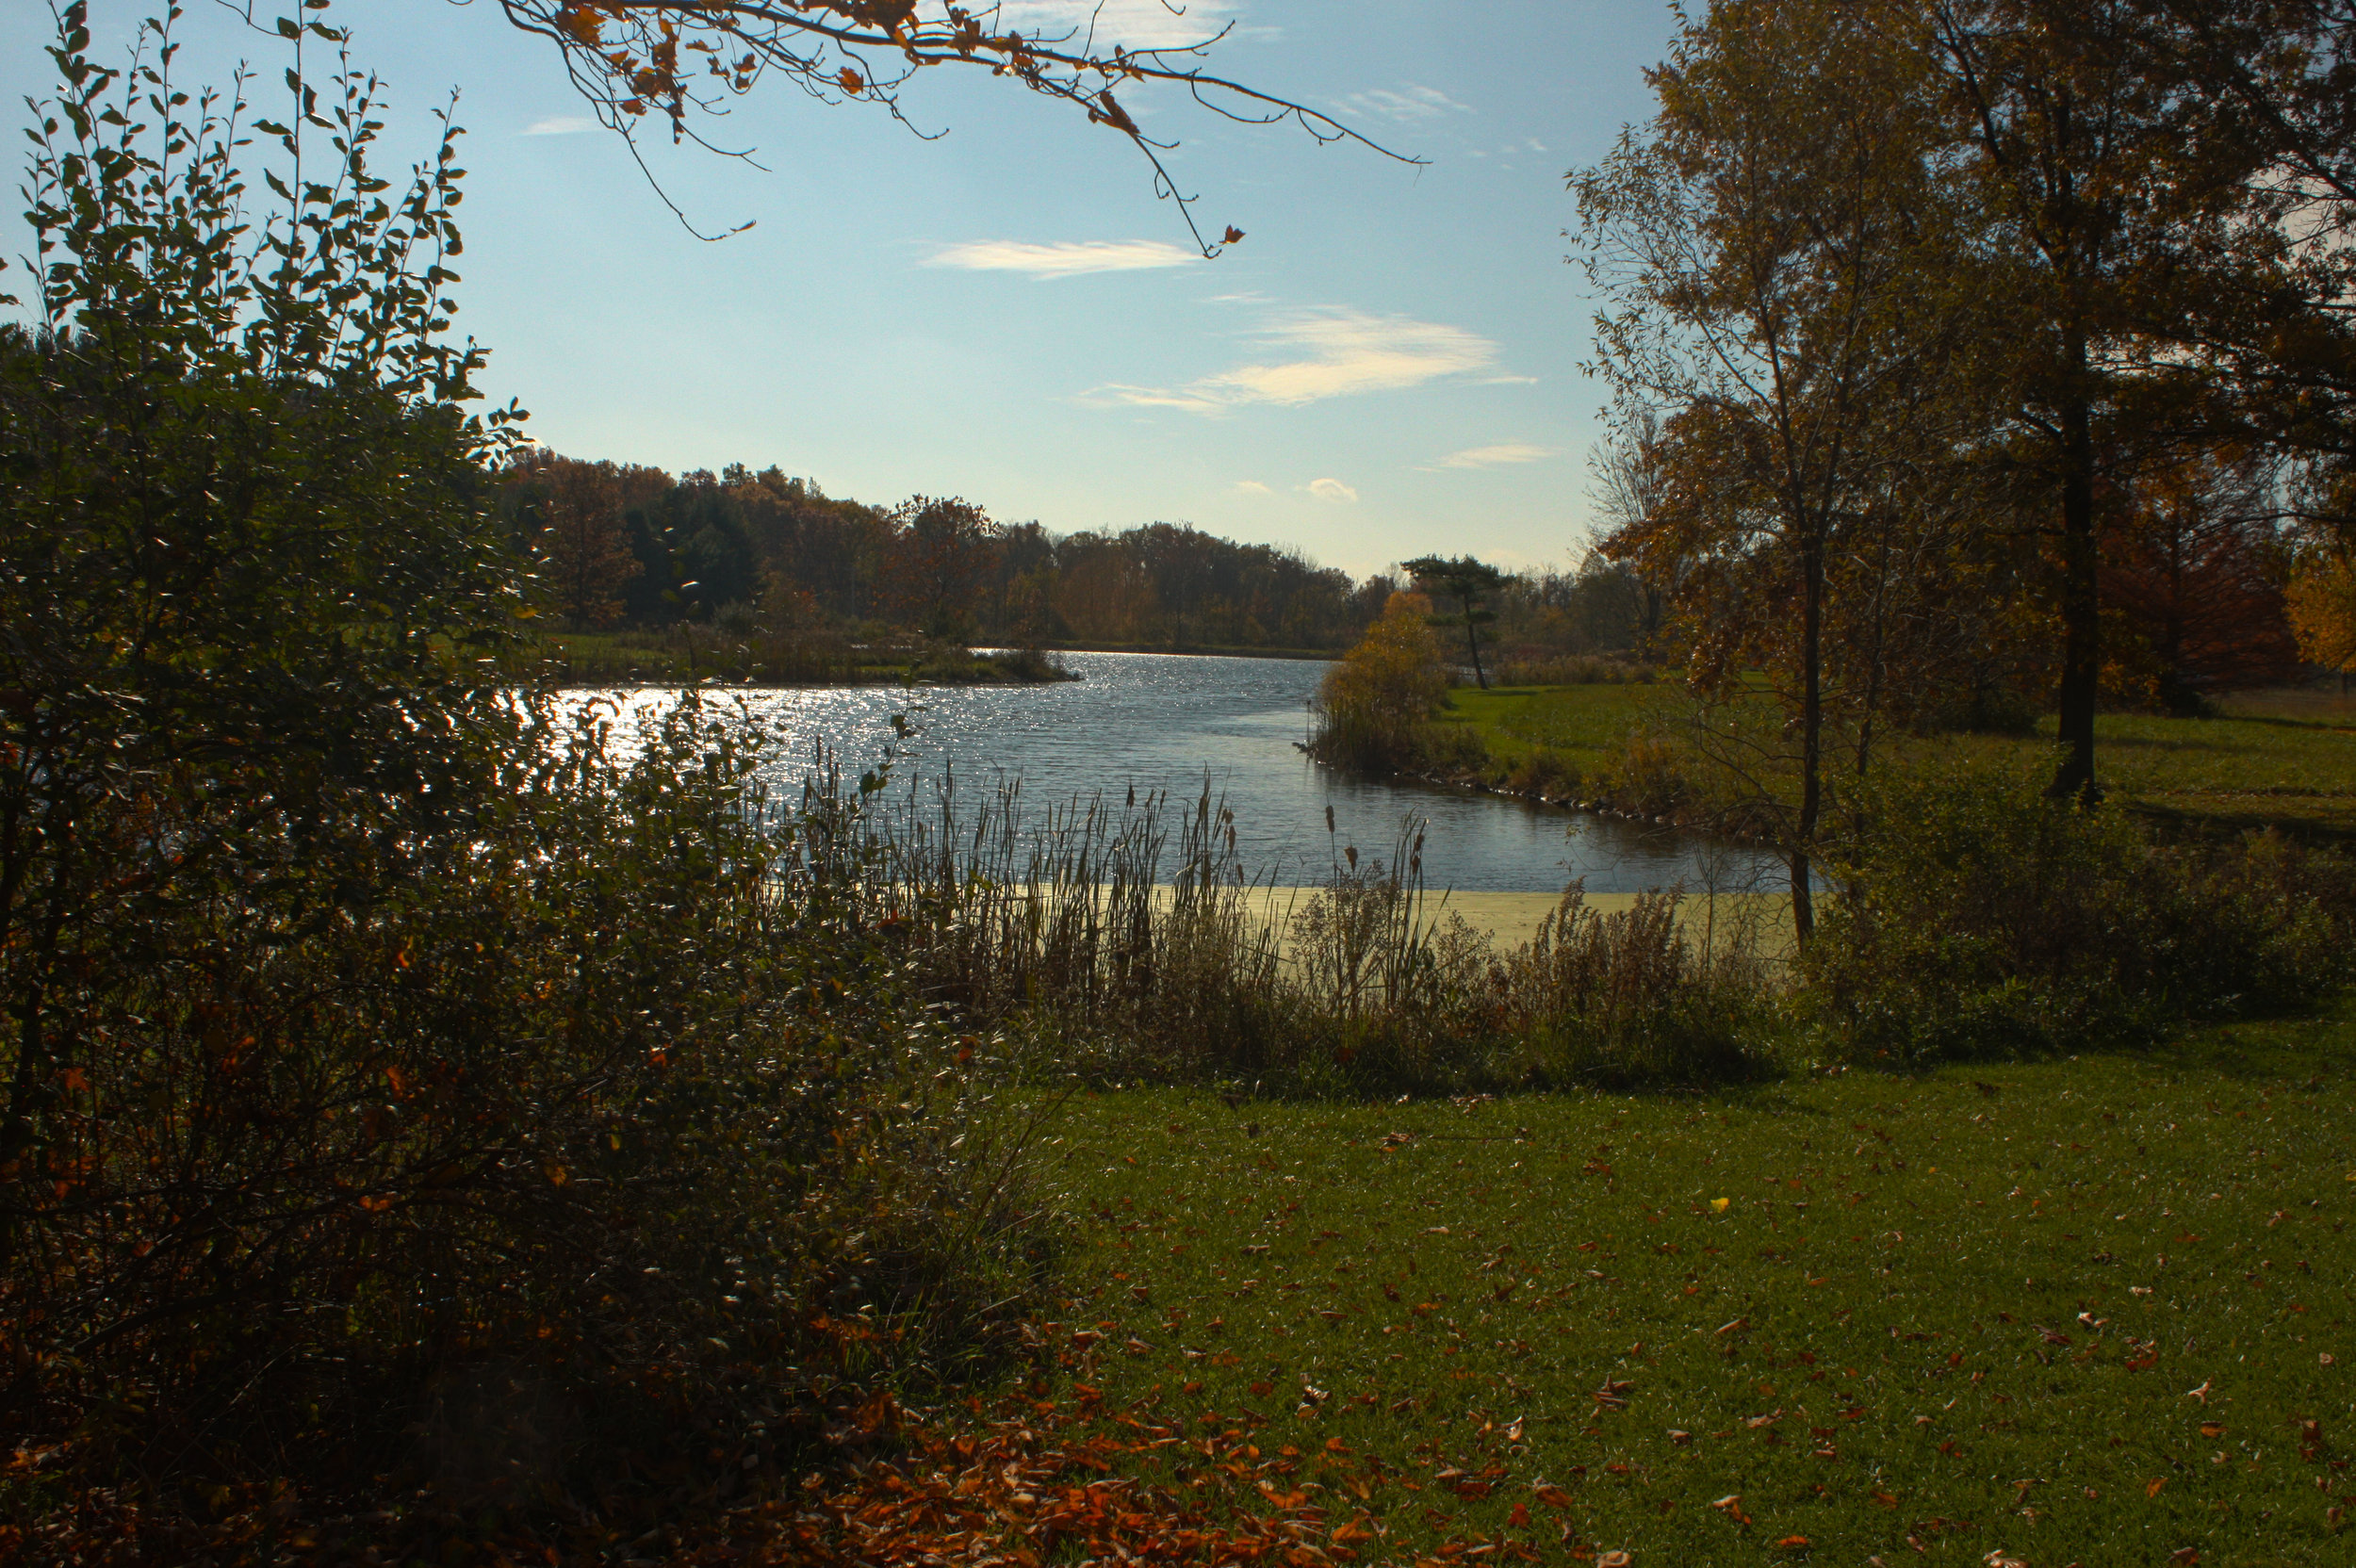 One of the ponds located at the Duck Pond Picnic Area